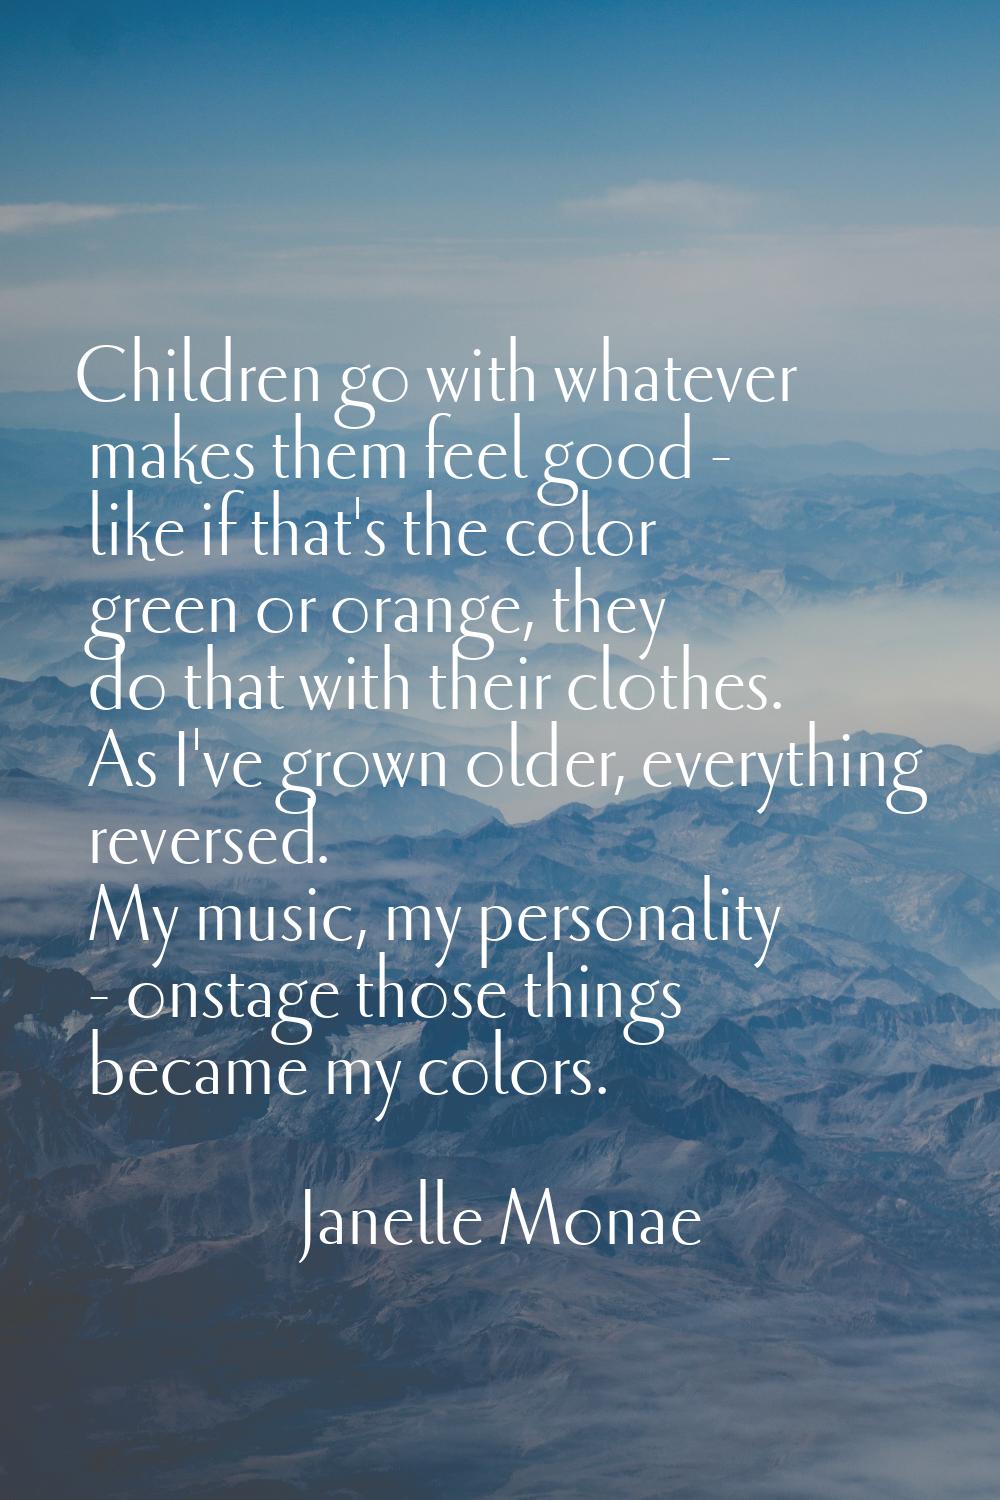 Children go with whatever makes them feel good - like if that's the color green or orange, they do 